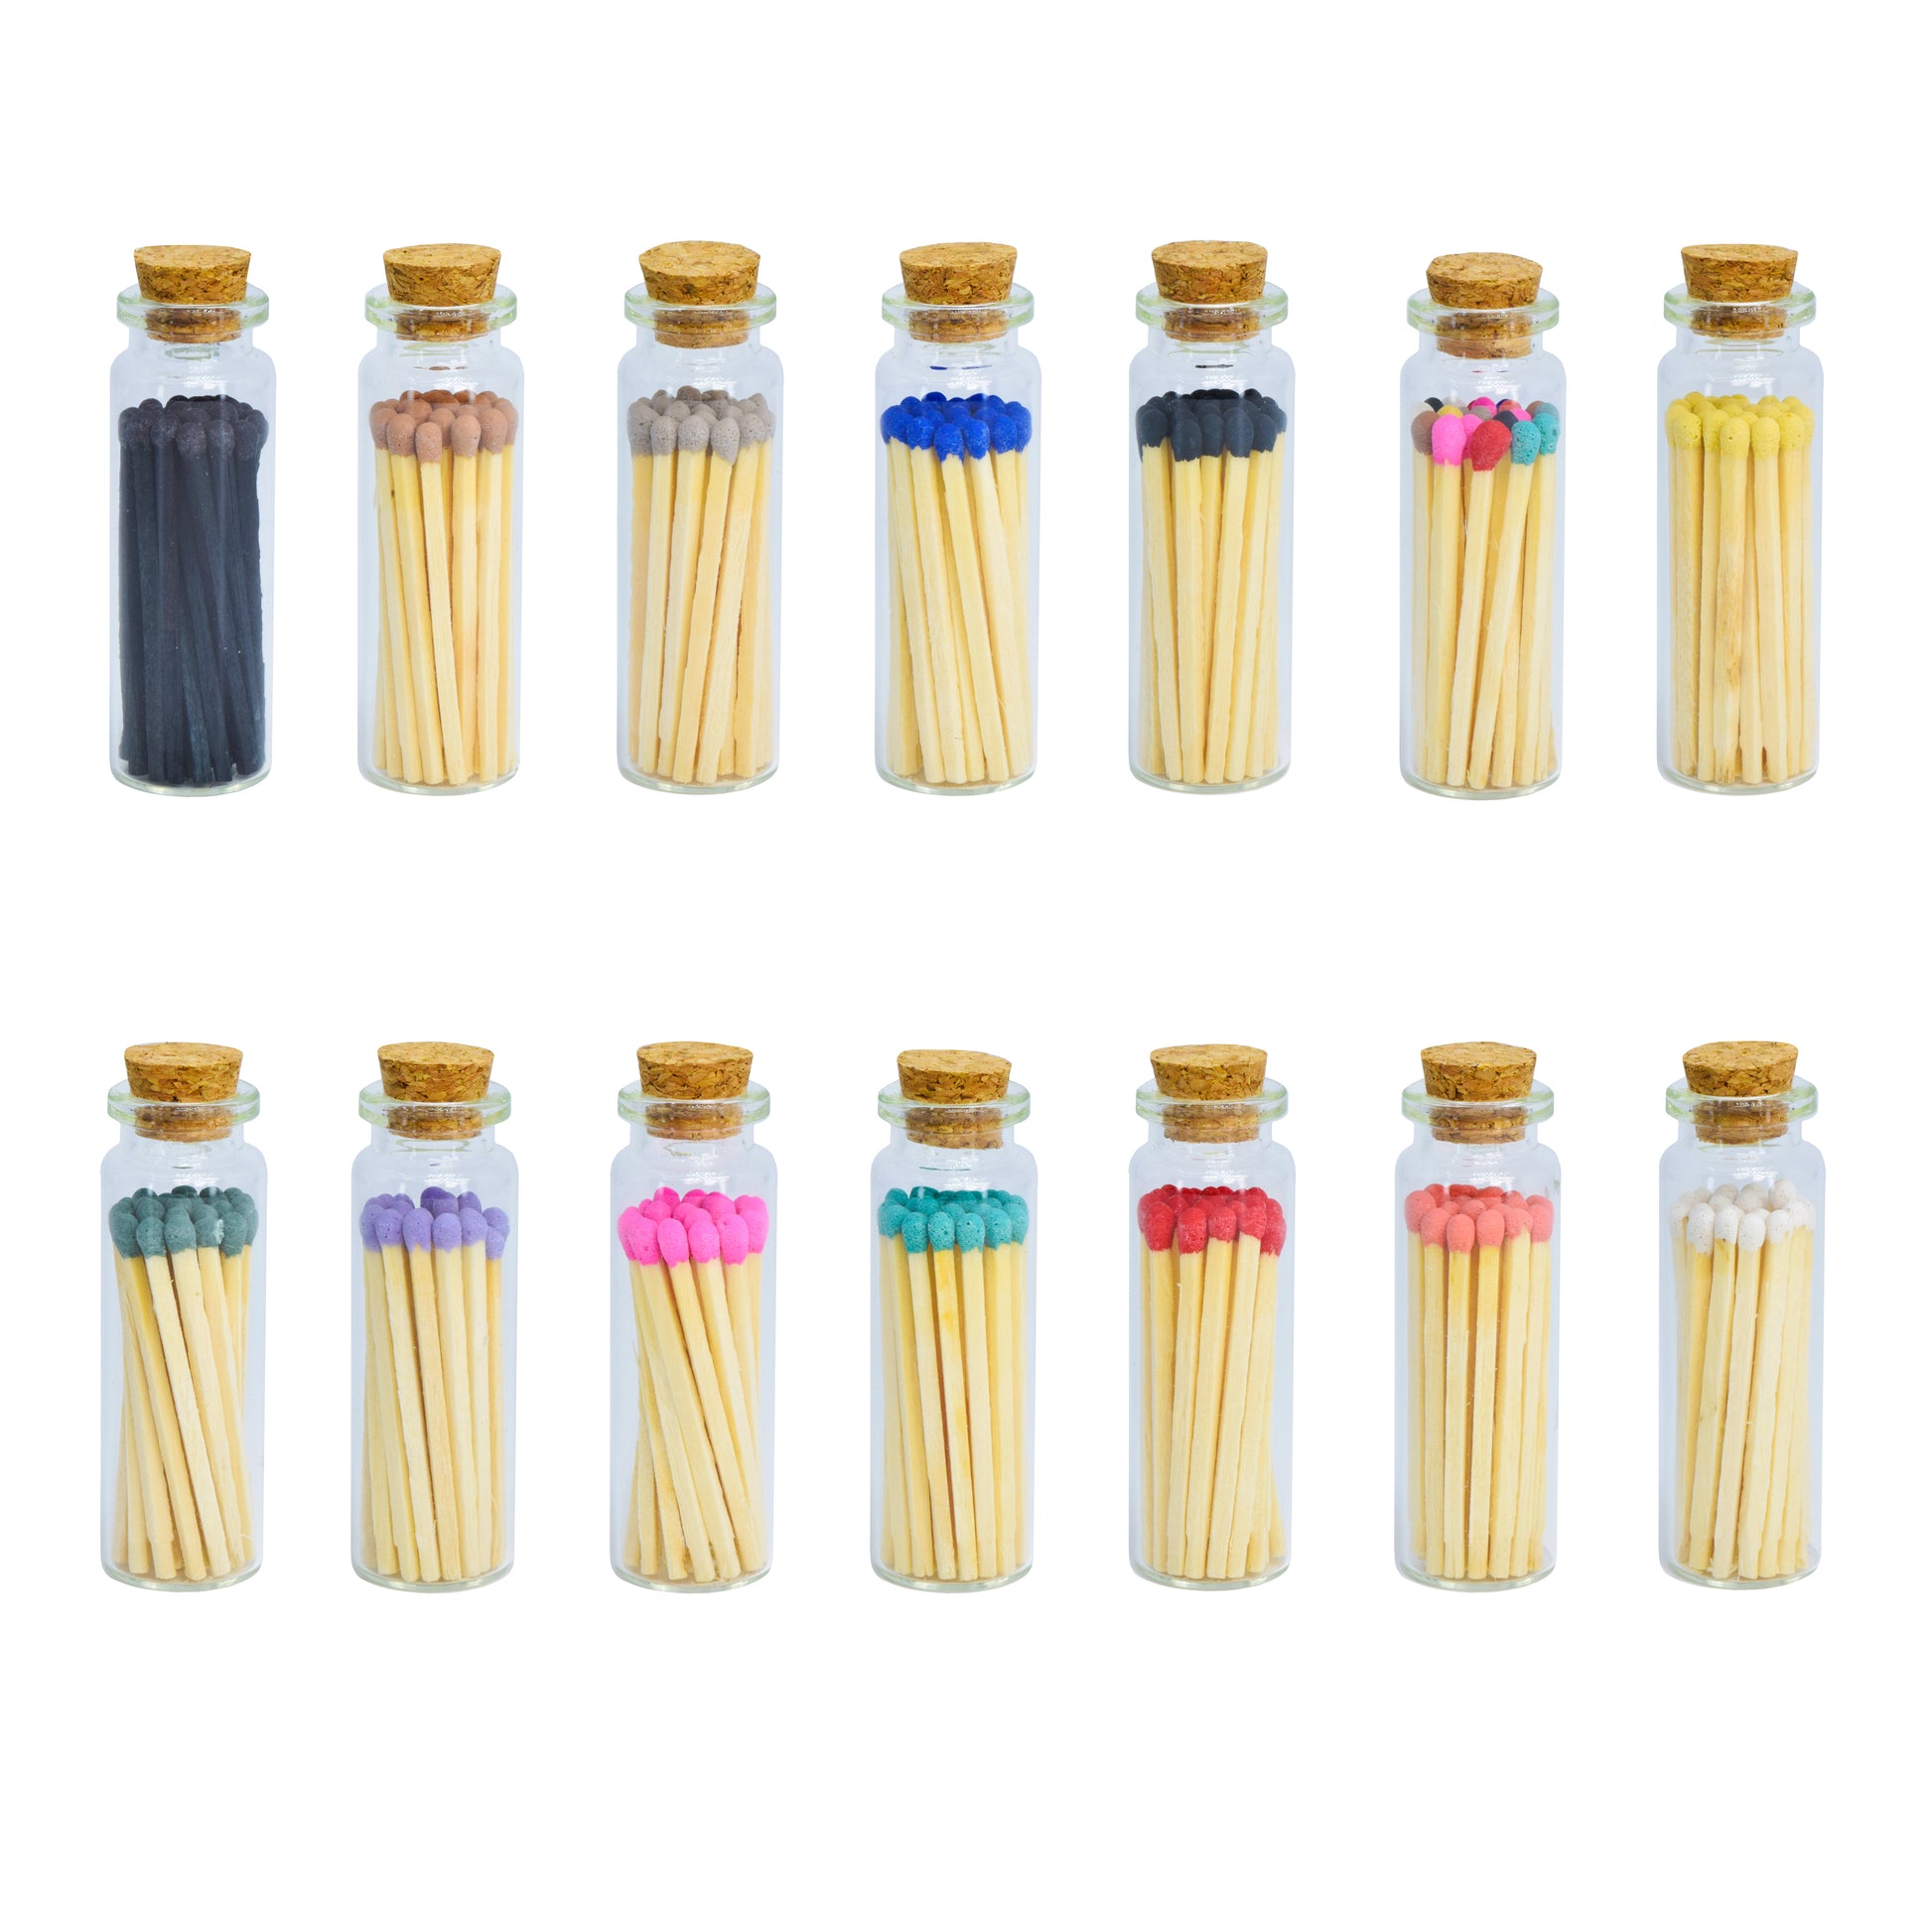 Fancy Wood Matches in Corked Vial – Enlighten the Occasion